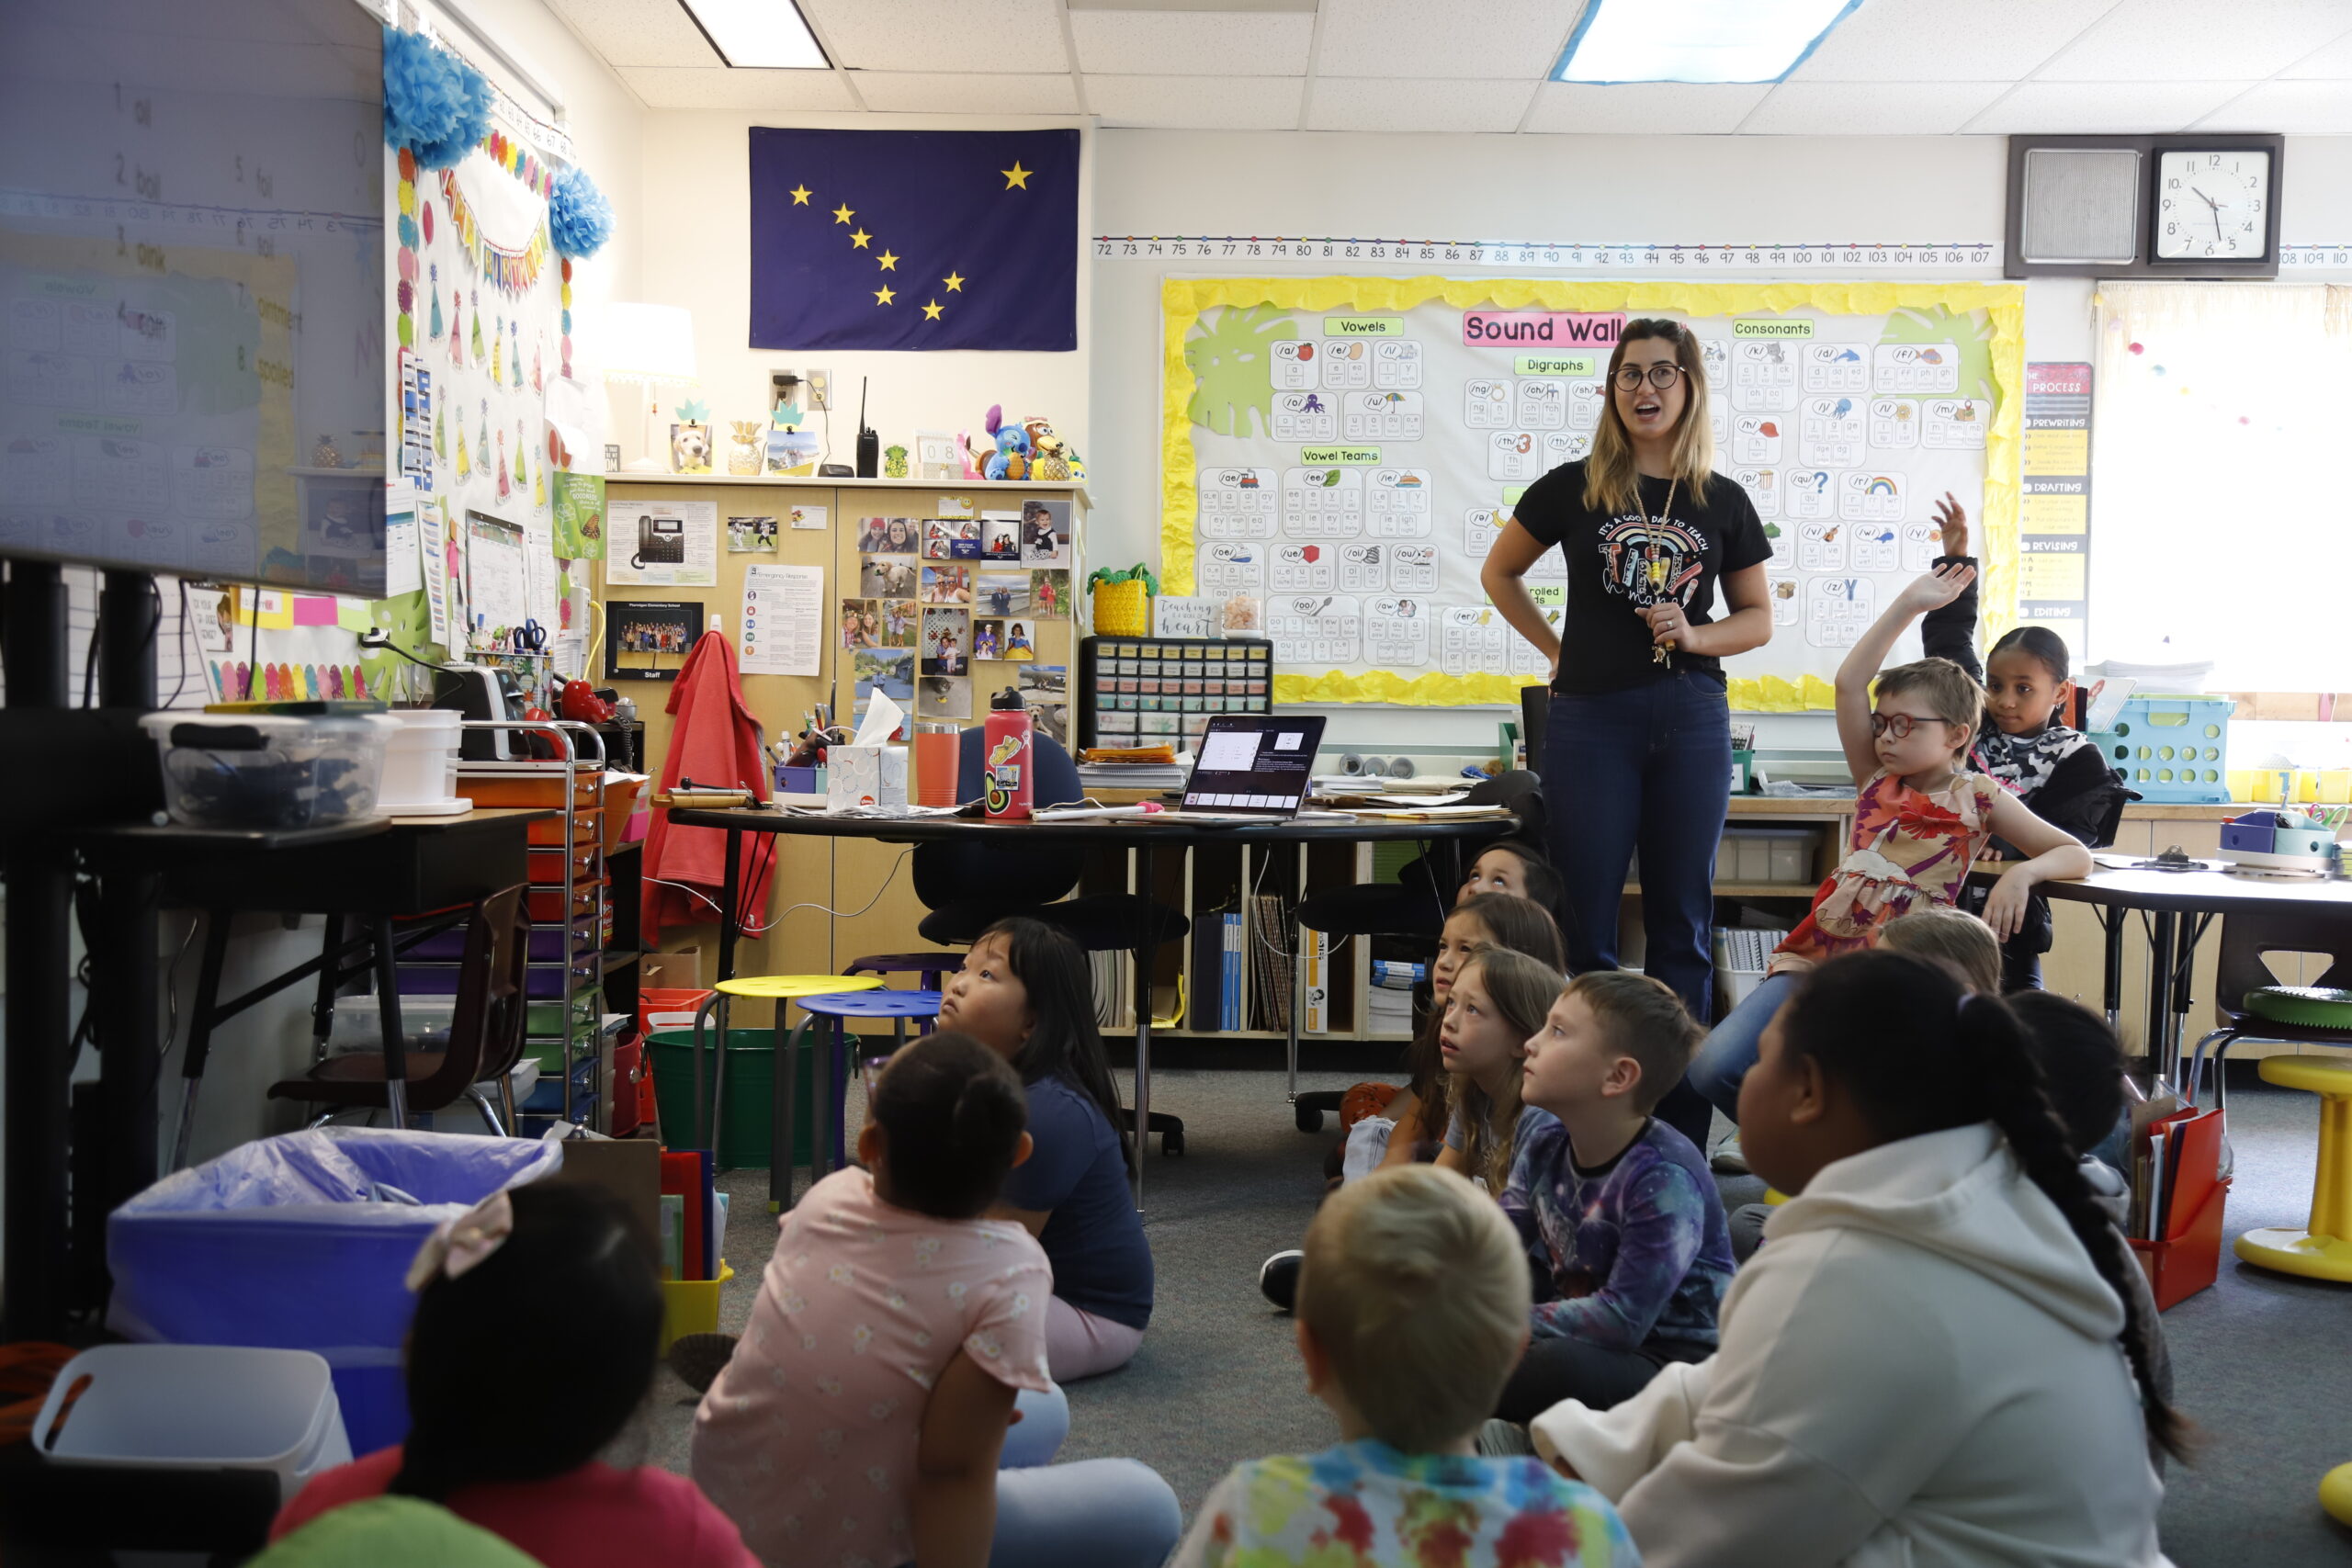 Students in a second grade classroom at Ptarmigan Elementary School in Anchorage receive instruction from student teacher Erisa Koci.